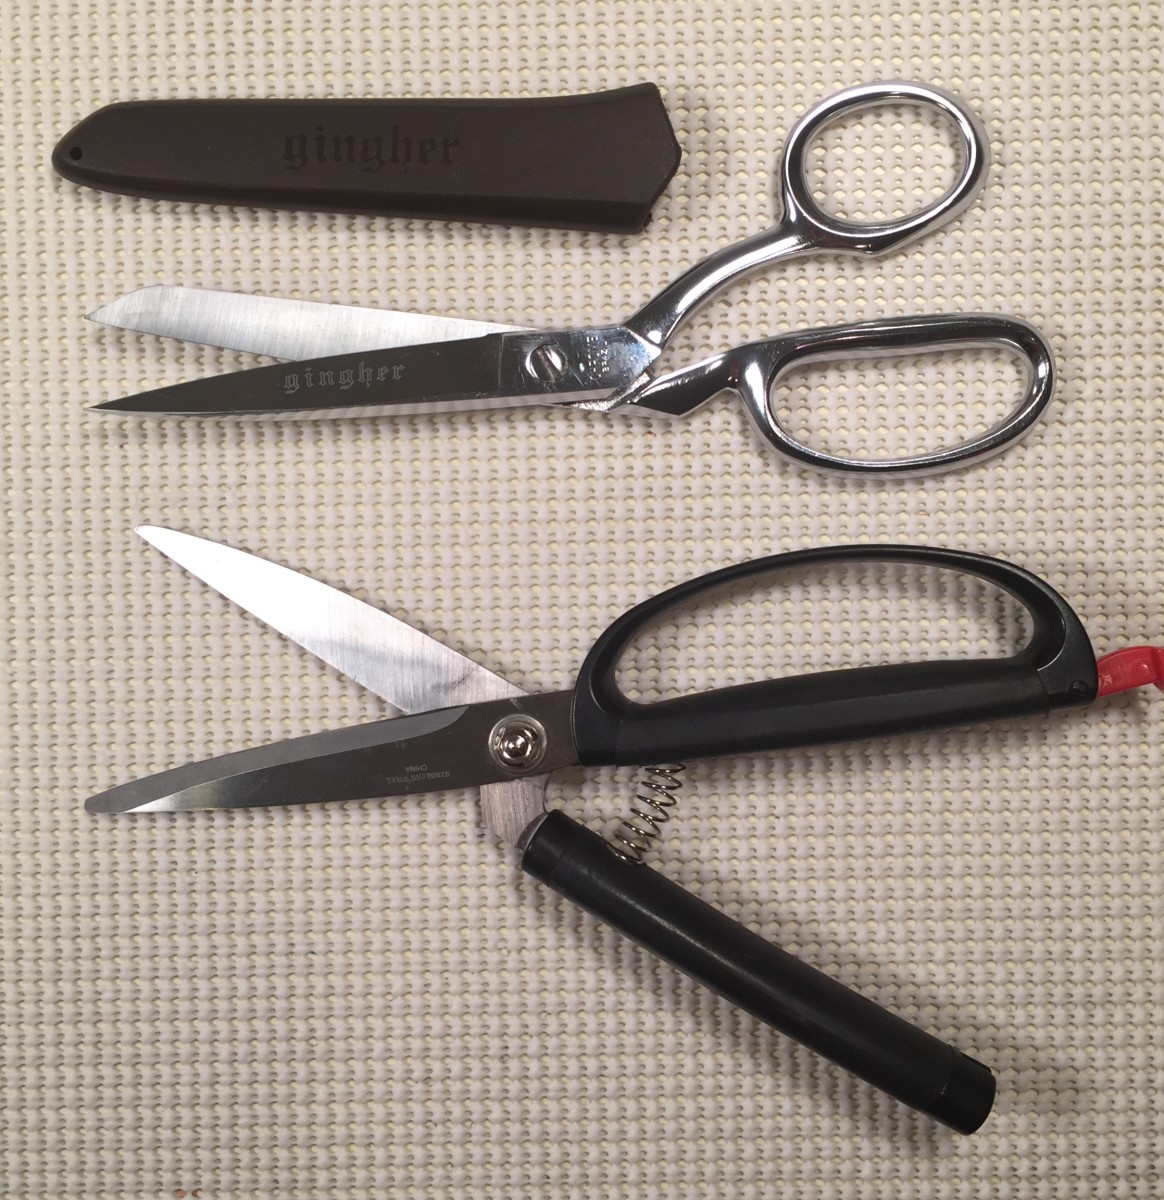 Fabric shears and spring-loaded scissors.